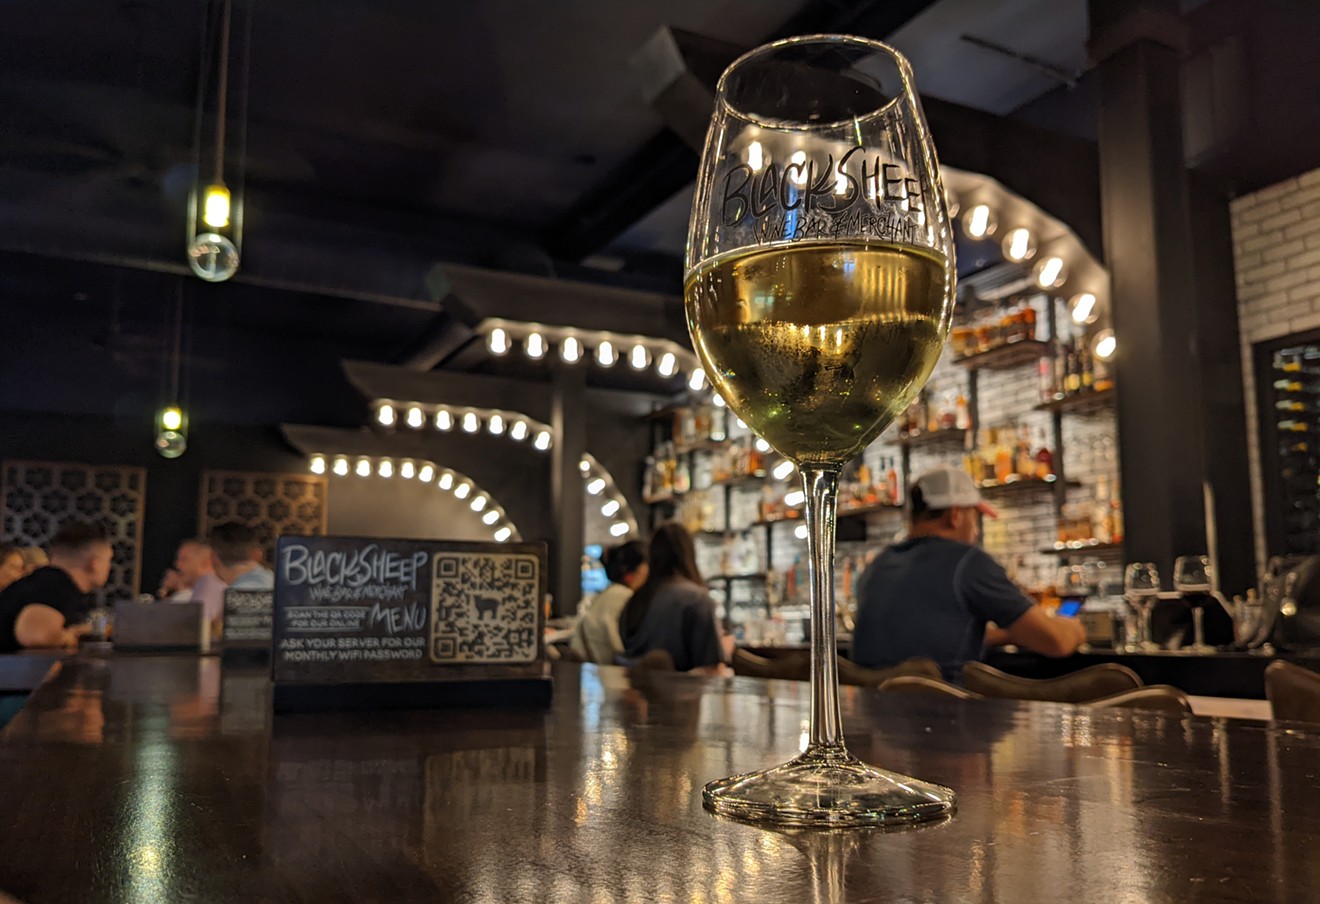 BlackSheep Wine Bar is a welcome addition to downtown Chandler.